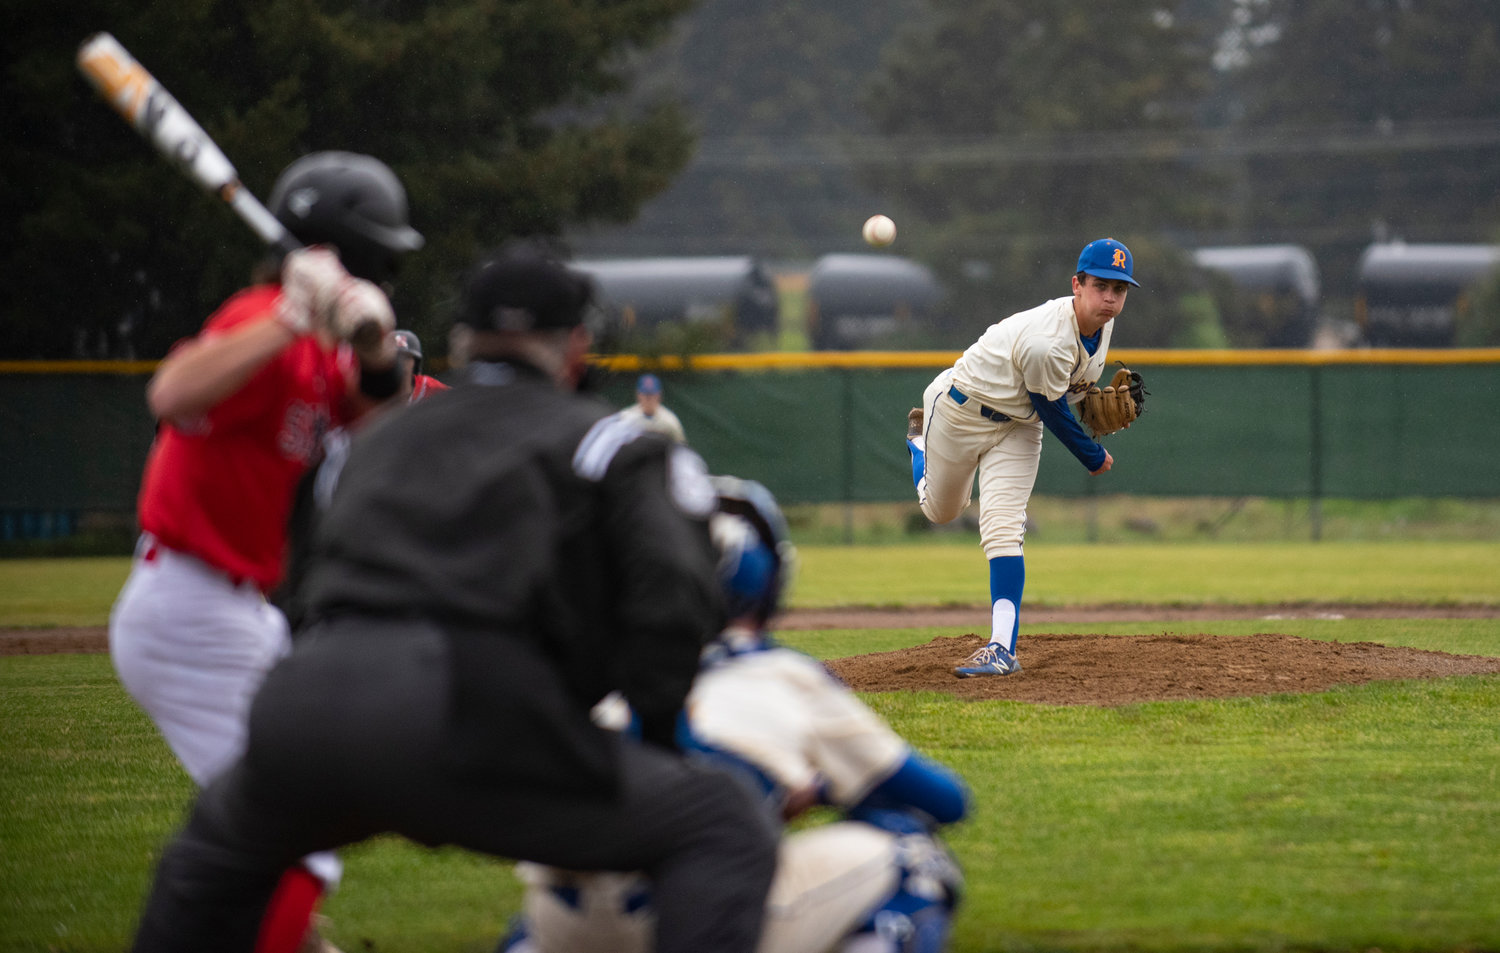 Rochester pitcher Tony Groninger delivers a pitch to a Shelton batter during a 2A Evergreen Conference playoff game on Monday in Rochester.